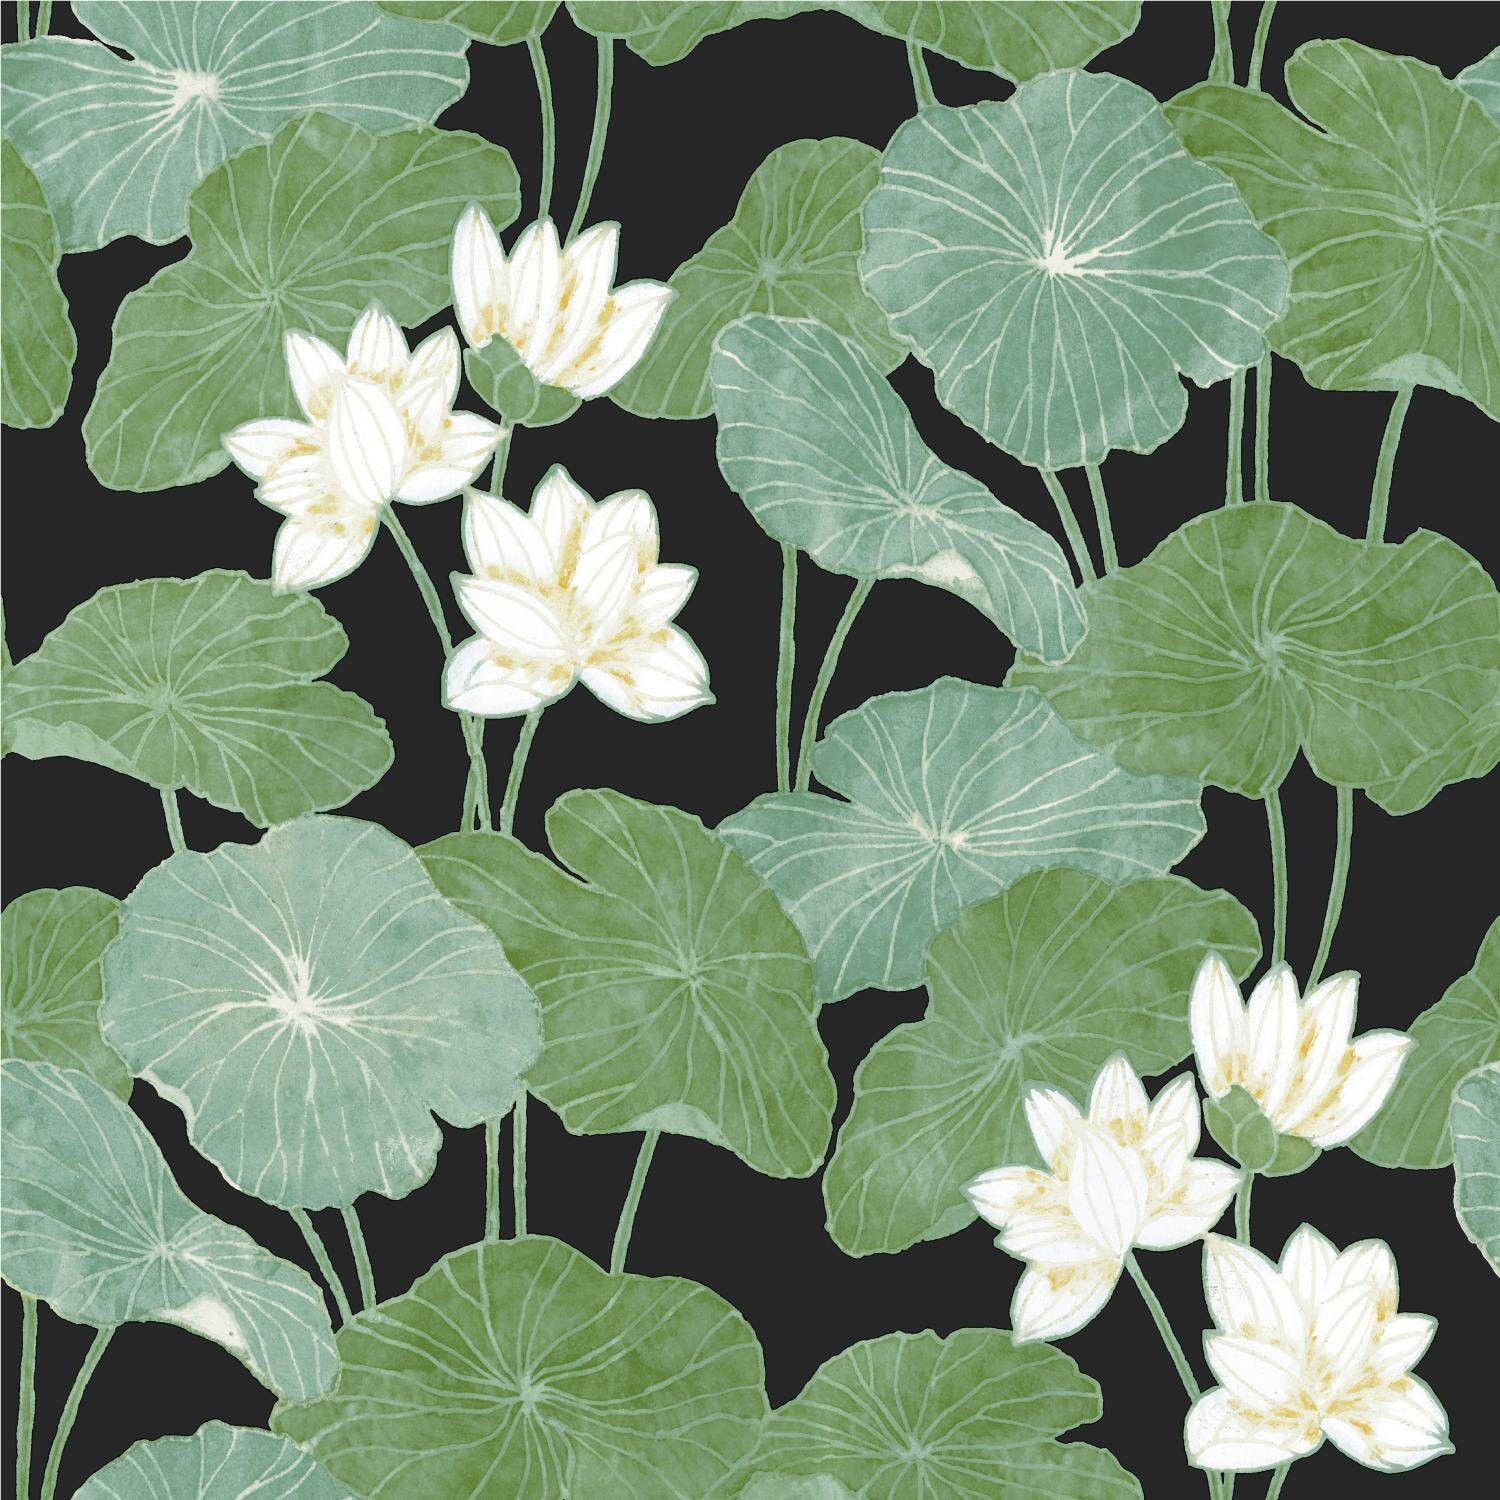 World Menagerie Circinus Lily Pad 16 5 L X 5 W Peel And Stick Wallpaper Roll Reviews Wayfair